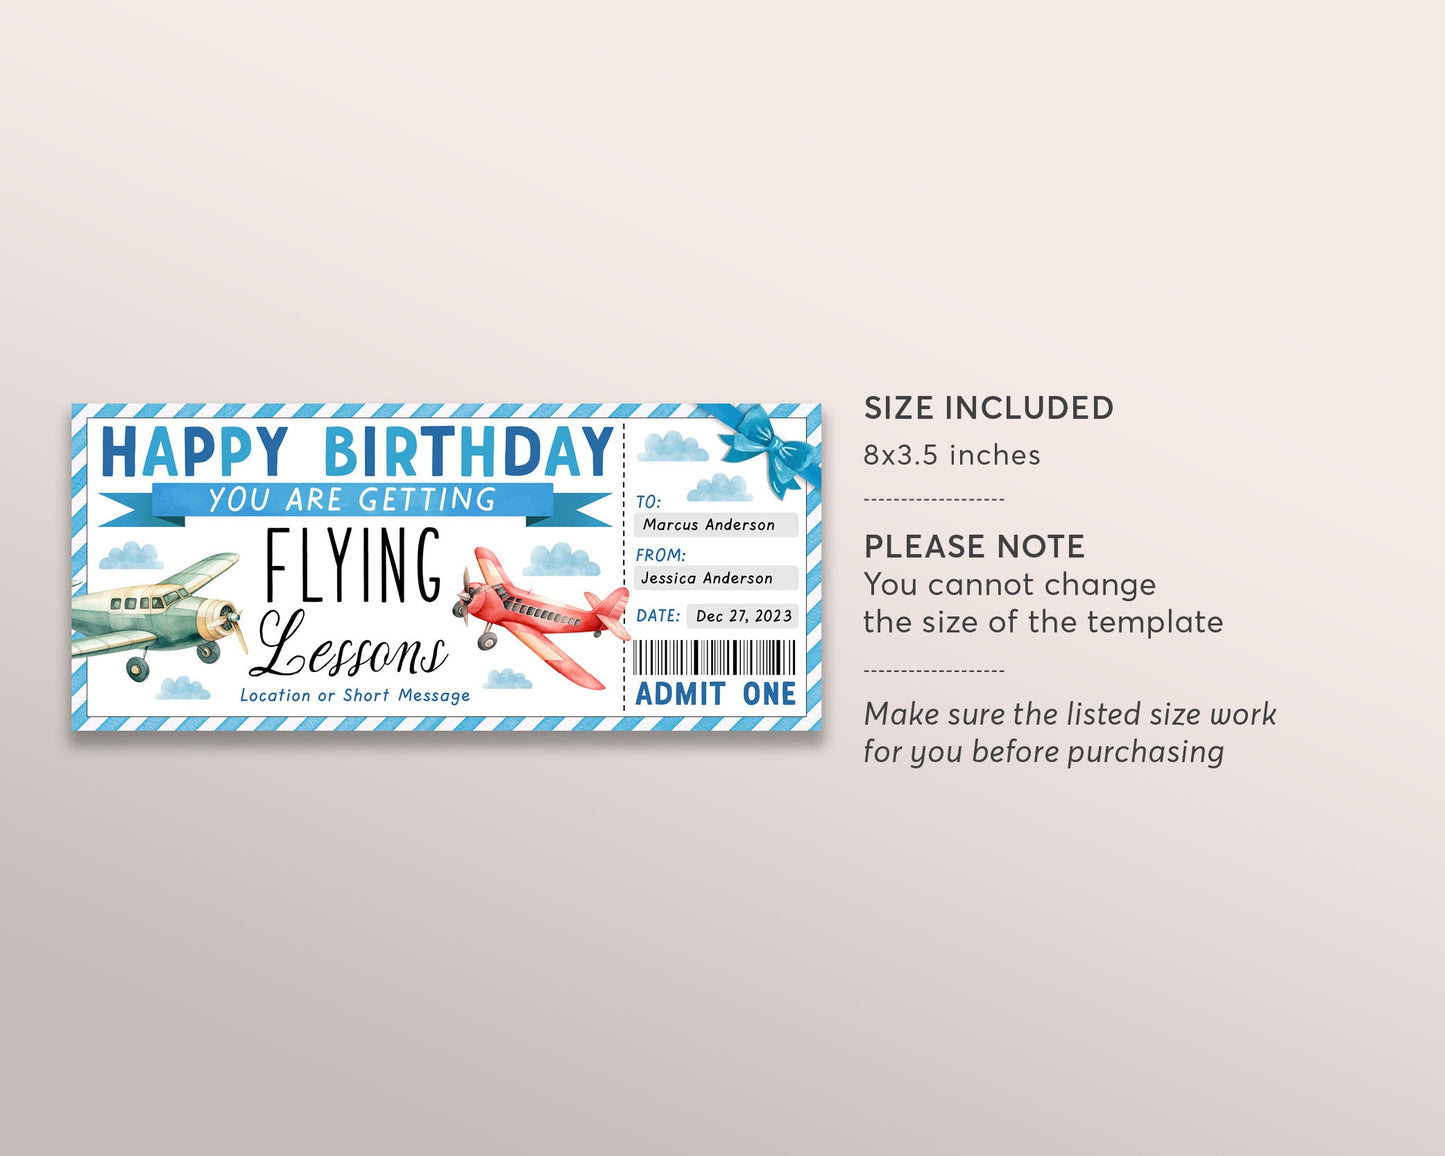 Flying Lessons Ticket Gift Voucher Editable Template, Surprise Birthday Flying Experience Pilot Training Gift Certificate Coupon Printable